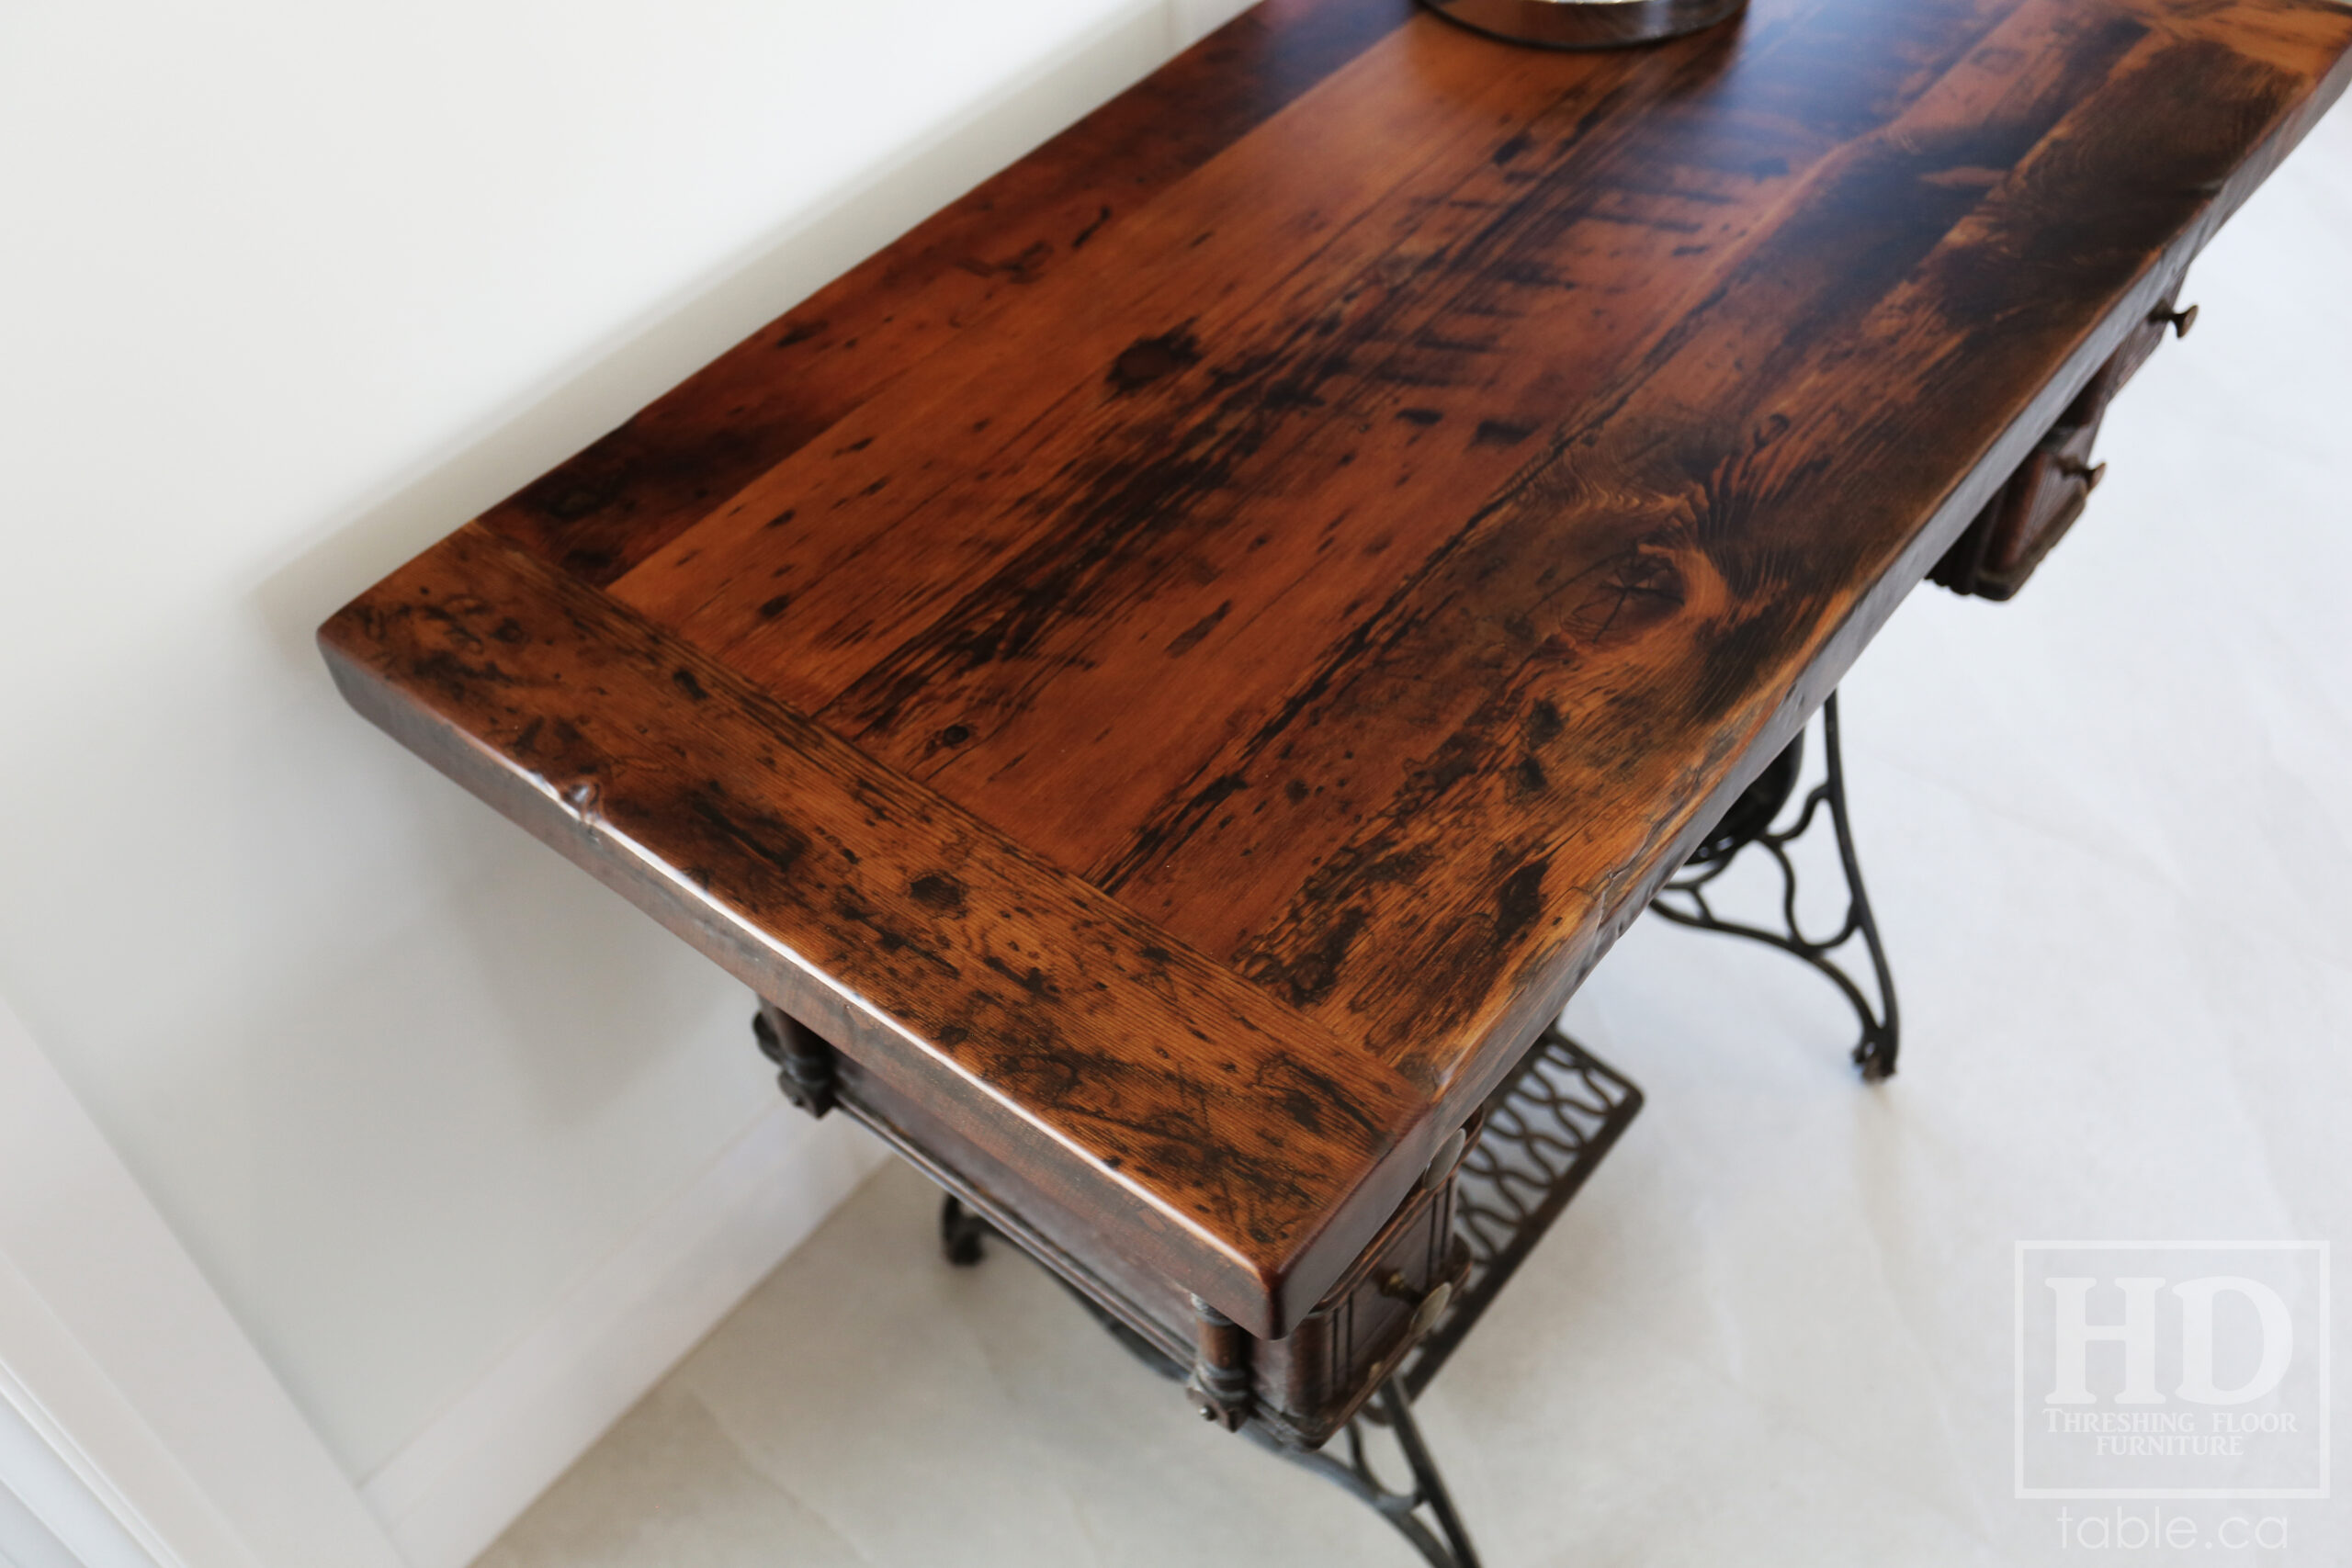 38" 3/4" x 20" Reclaimed Ontario Barnwood Top we made for a customer's antique Singer Sewing Machine base - Hemlock Threshing Floor Construction - Original edges & distressing maintained - Bread Board Ends - Premium epoxy + matte polyurethane finish / www.table.ca